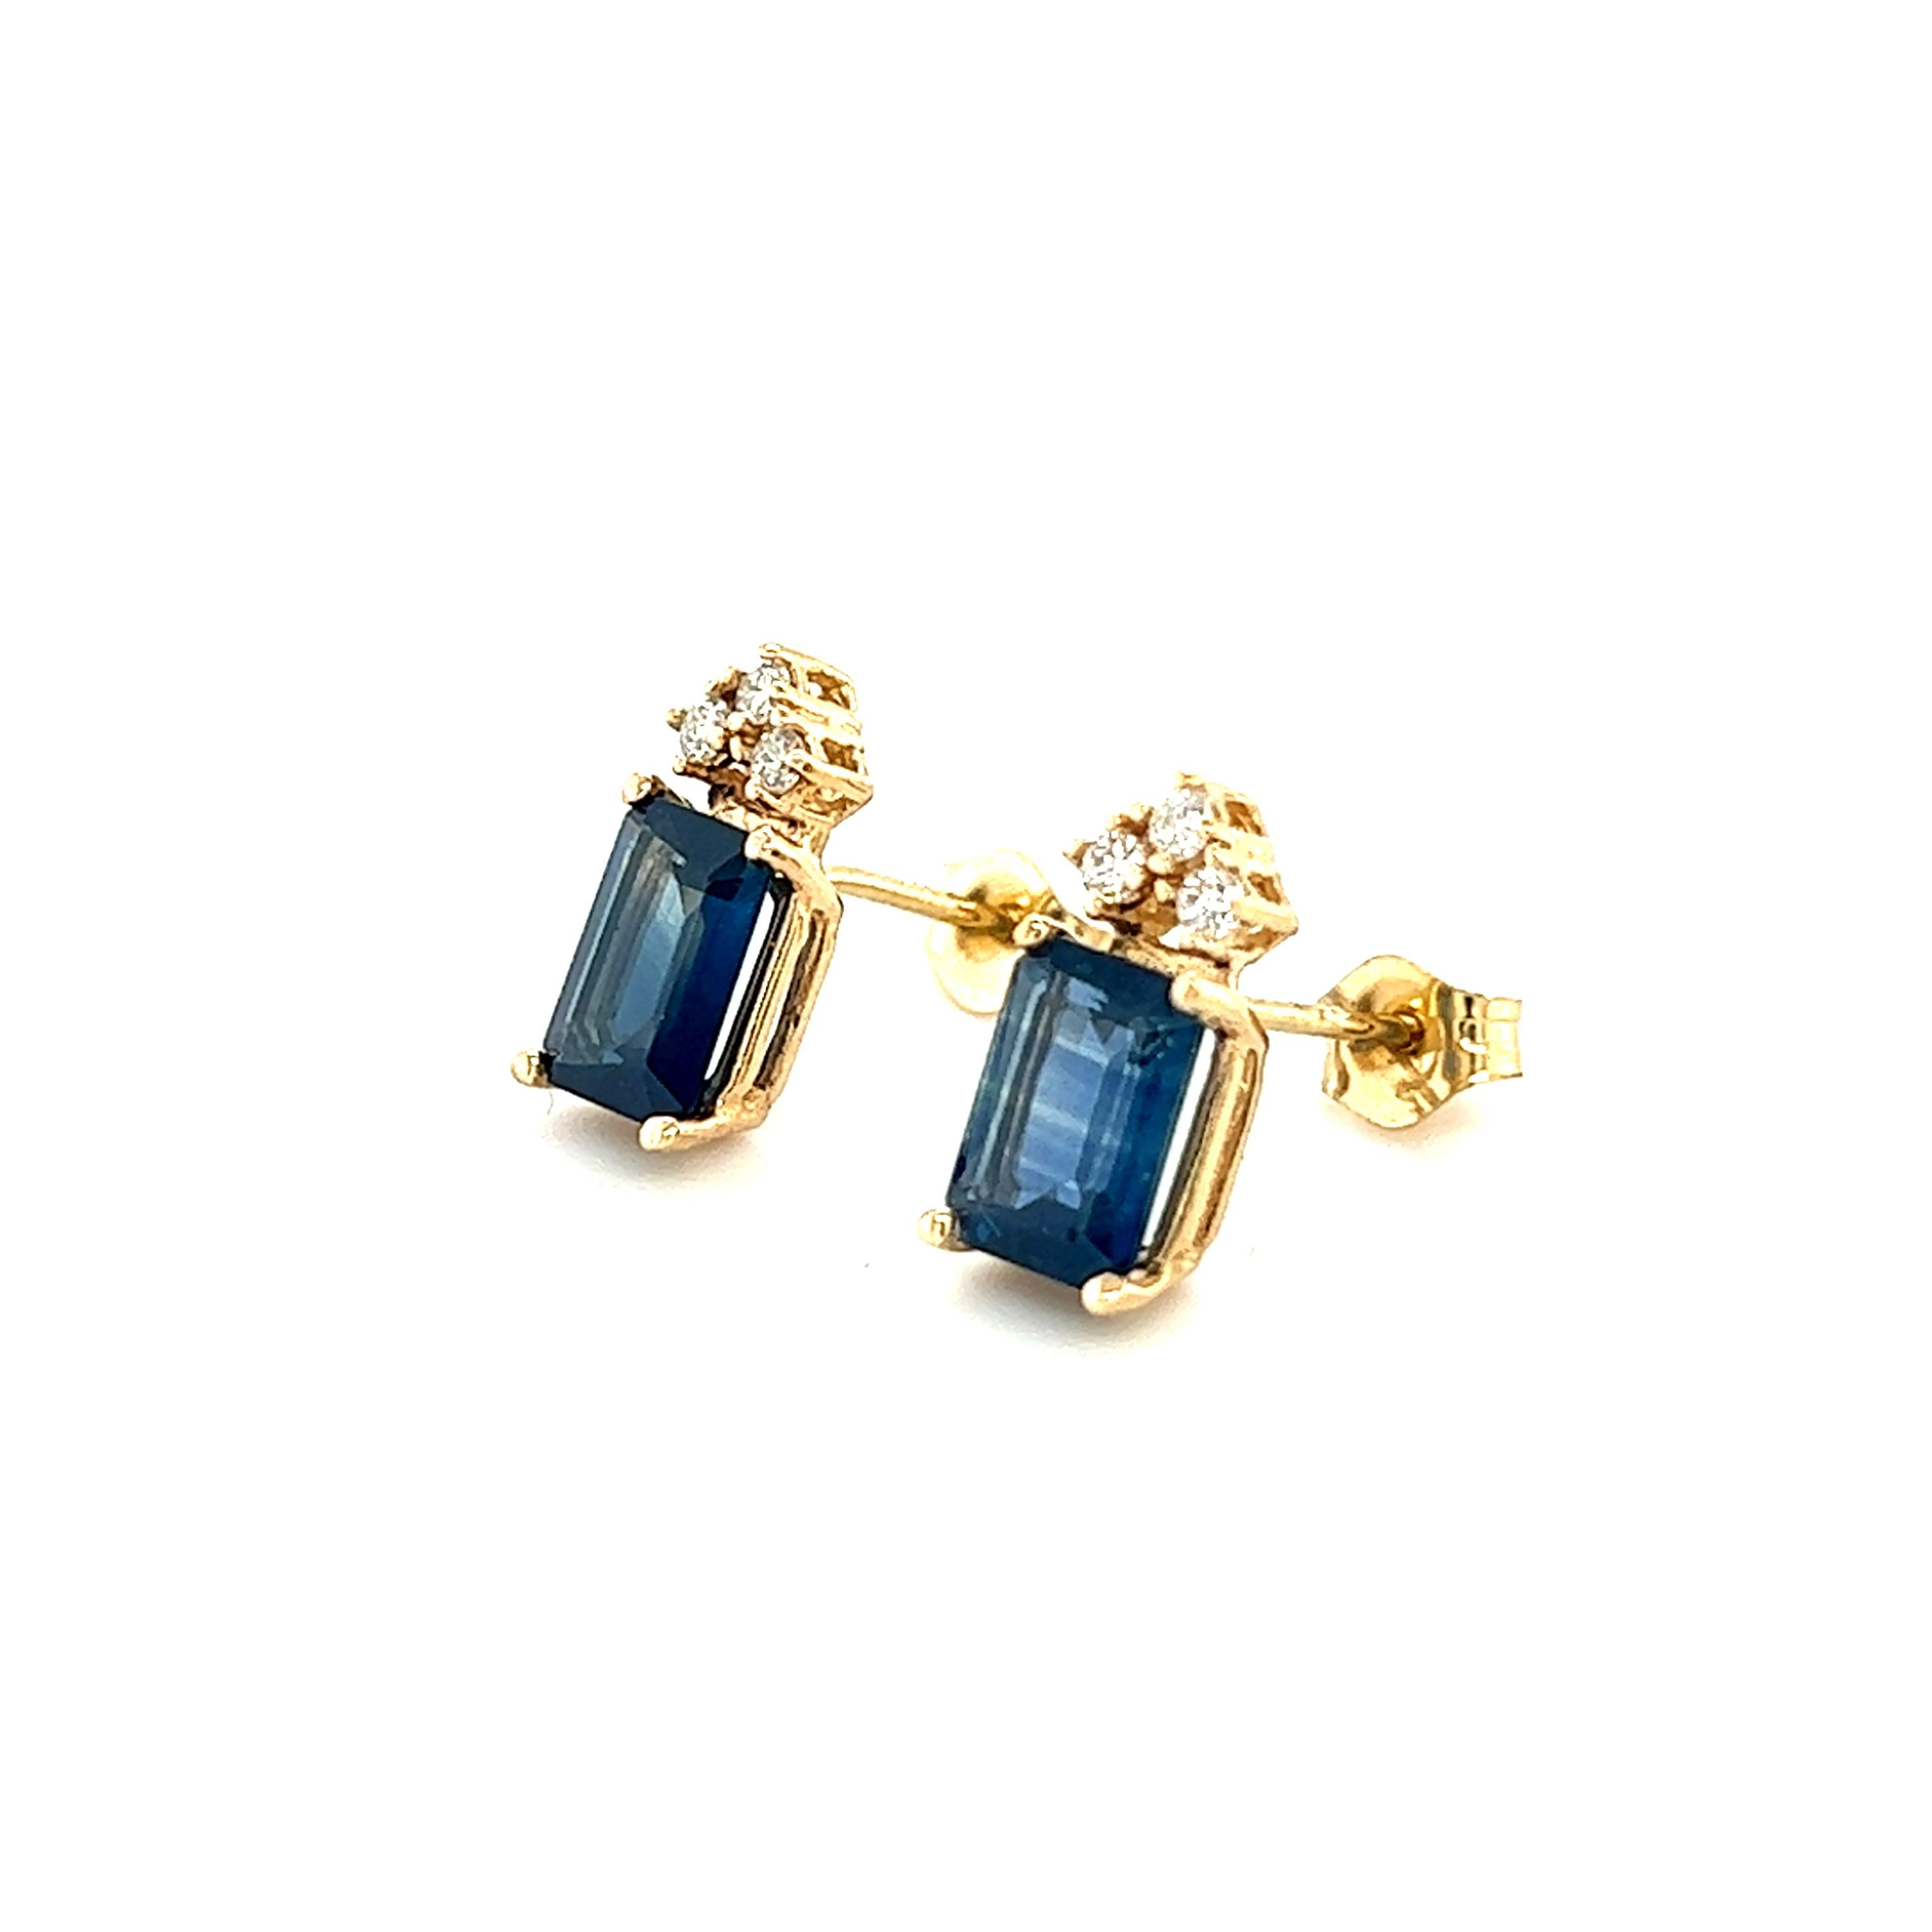 Natural Sapphire Diamond Earrings 14k Gold 2.14 TCW Certified For Sale 1